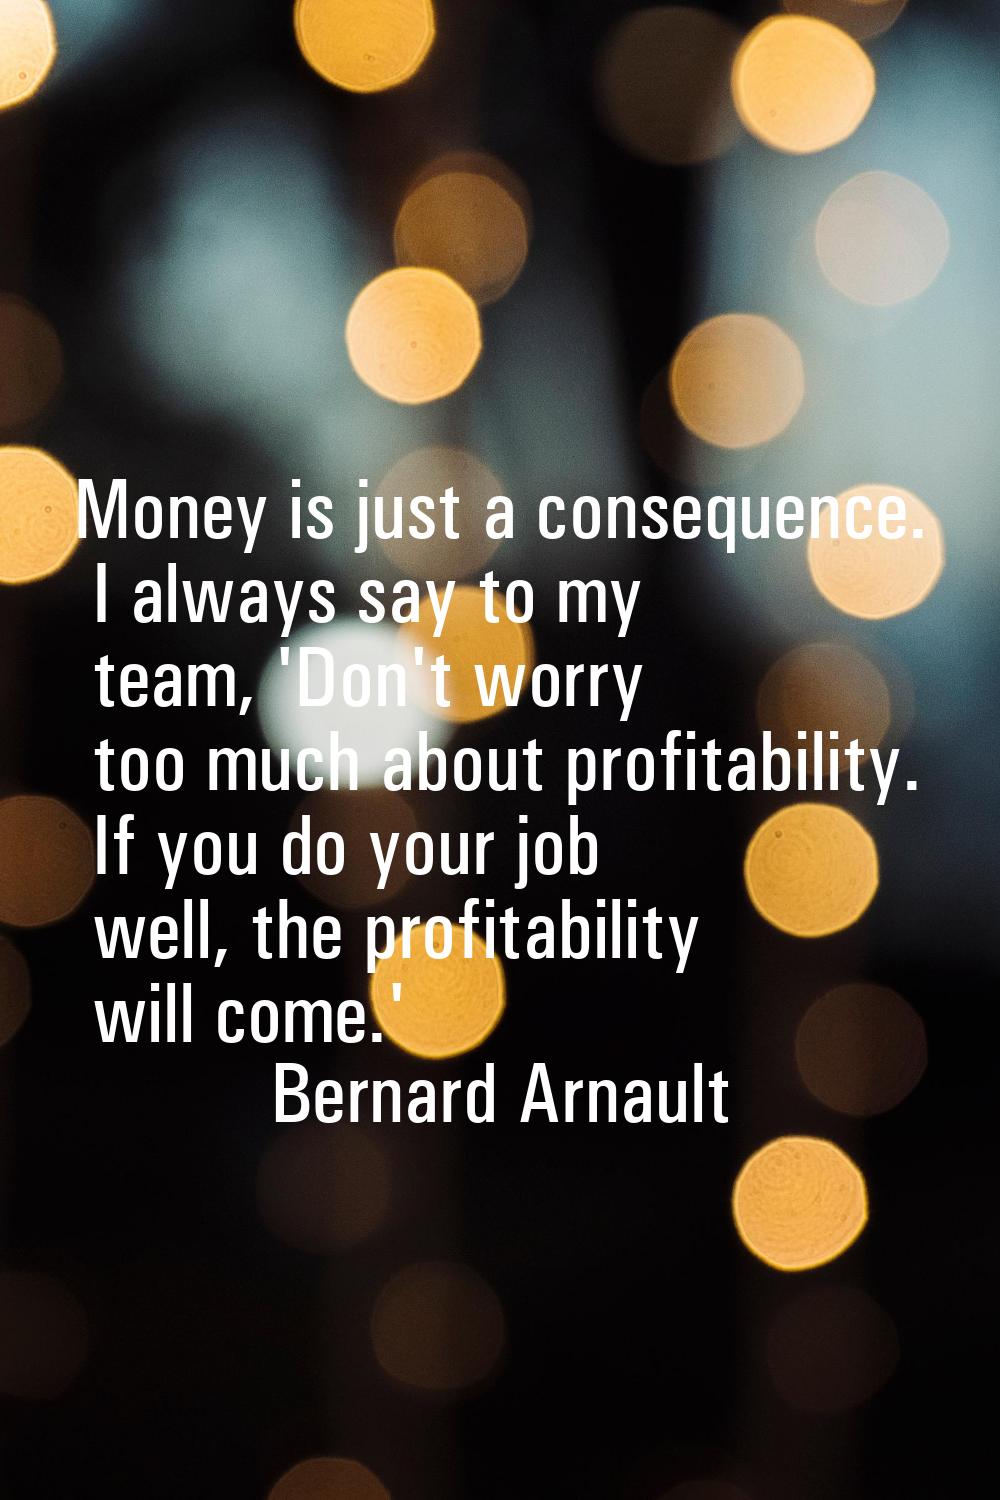 Money is just a consequence. I always say to my team, 'Don't worry too much about profitability. If